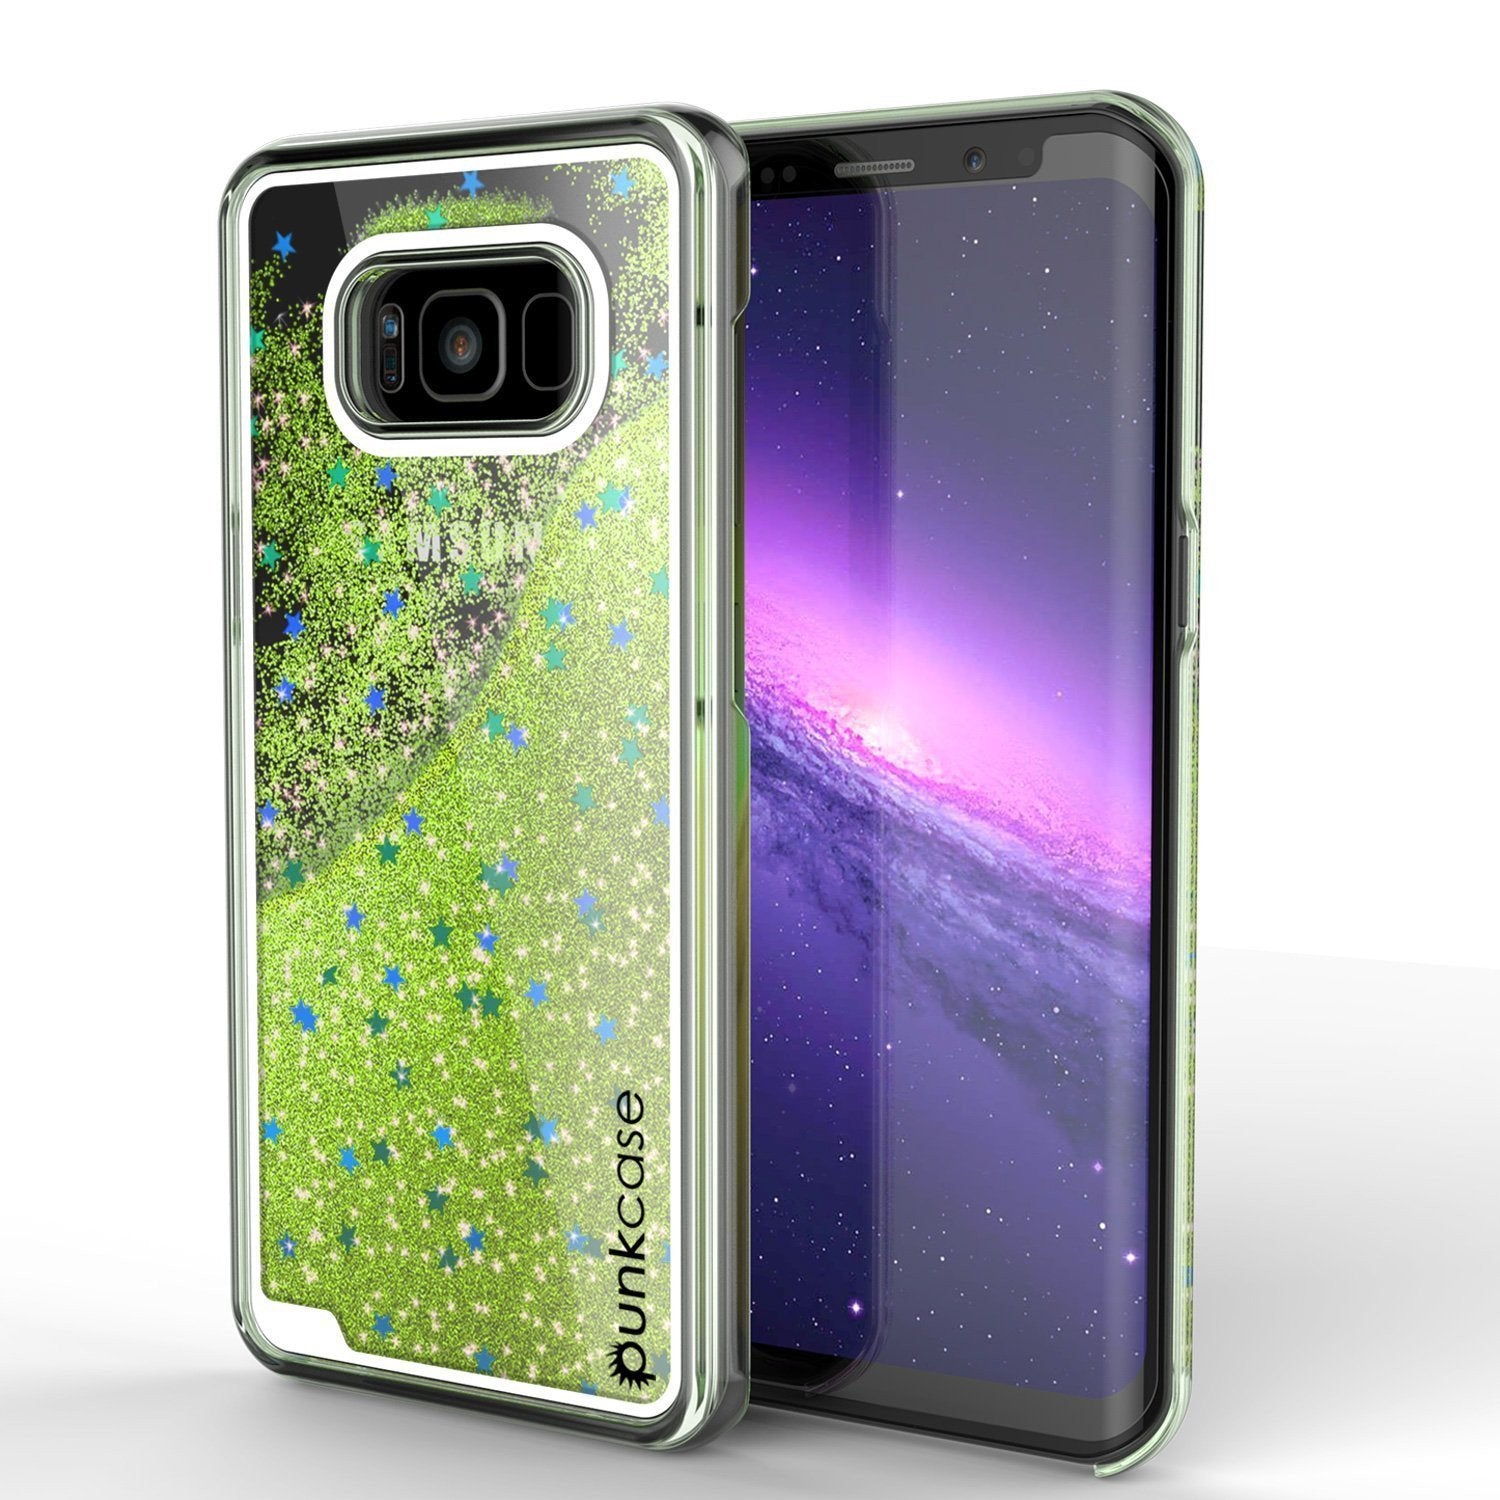 S8 Plus Case, Punkcase [Liquid Series] Protective Dual Layer Floating Glitter Cover with lots of Bling & Sparkle + PunkShield Screen Protector for Samsungs Galaxy S8+ (Light Green] - PunkCase NZ